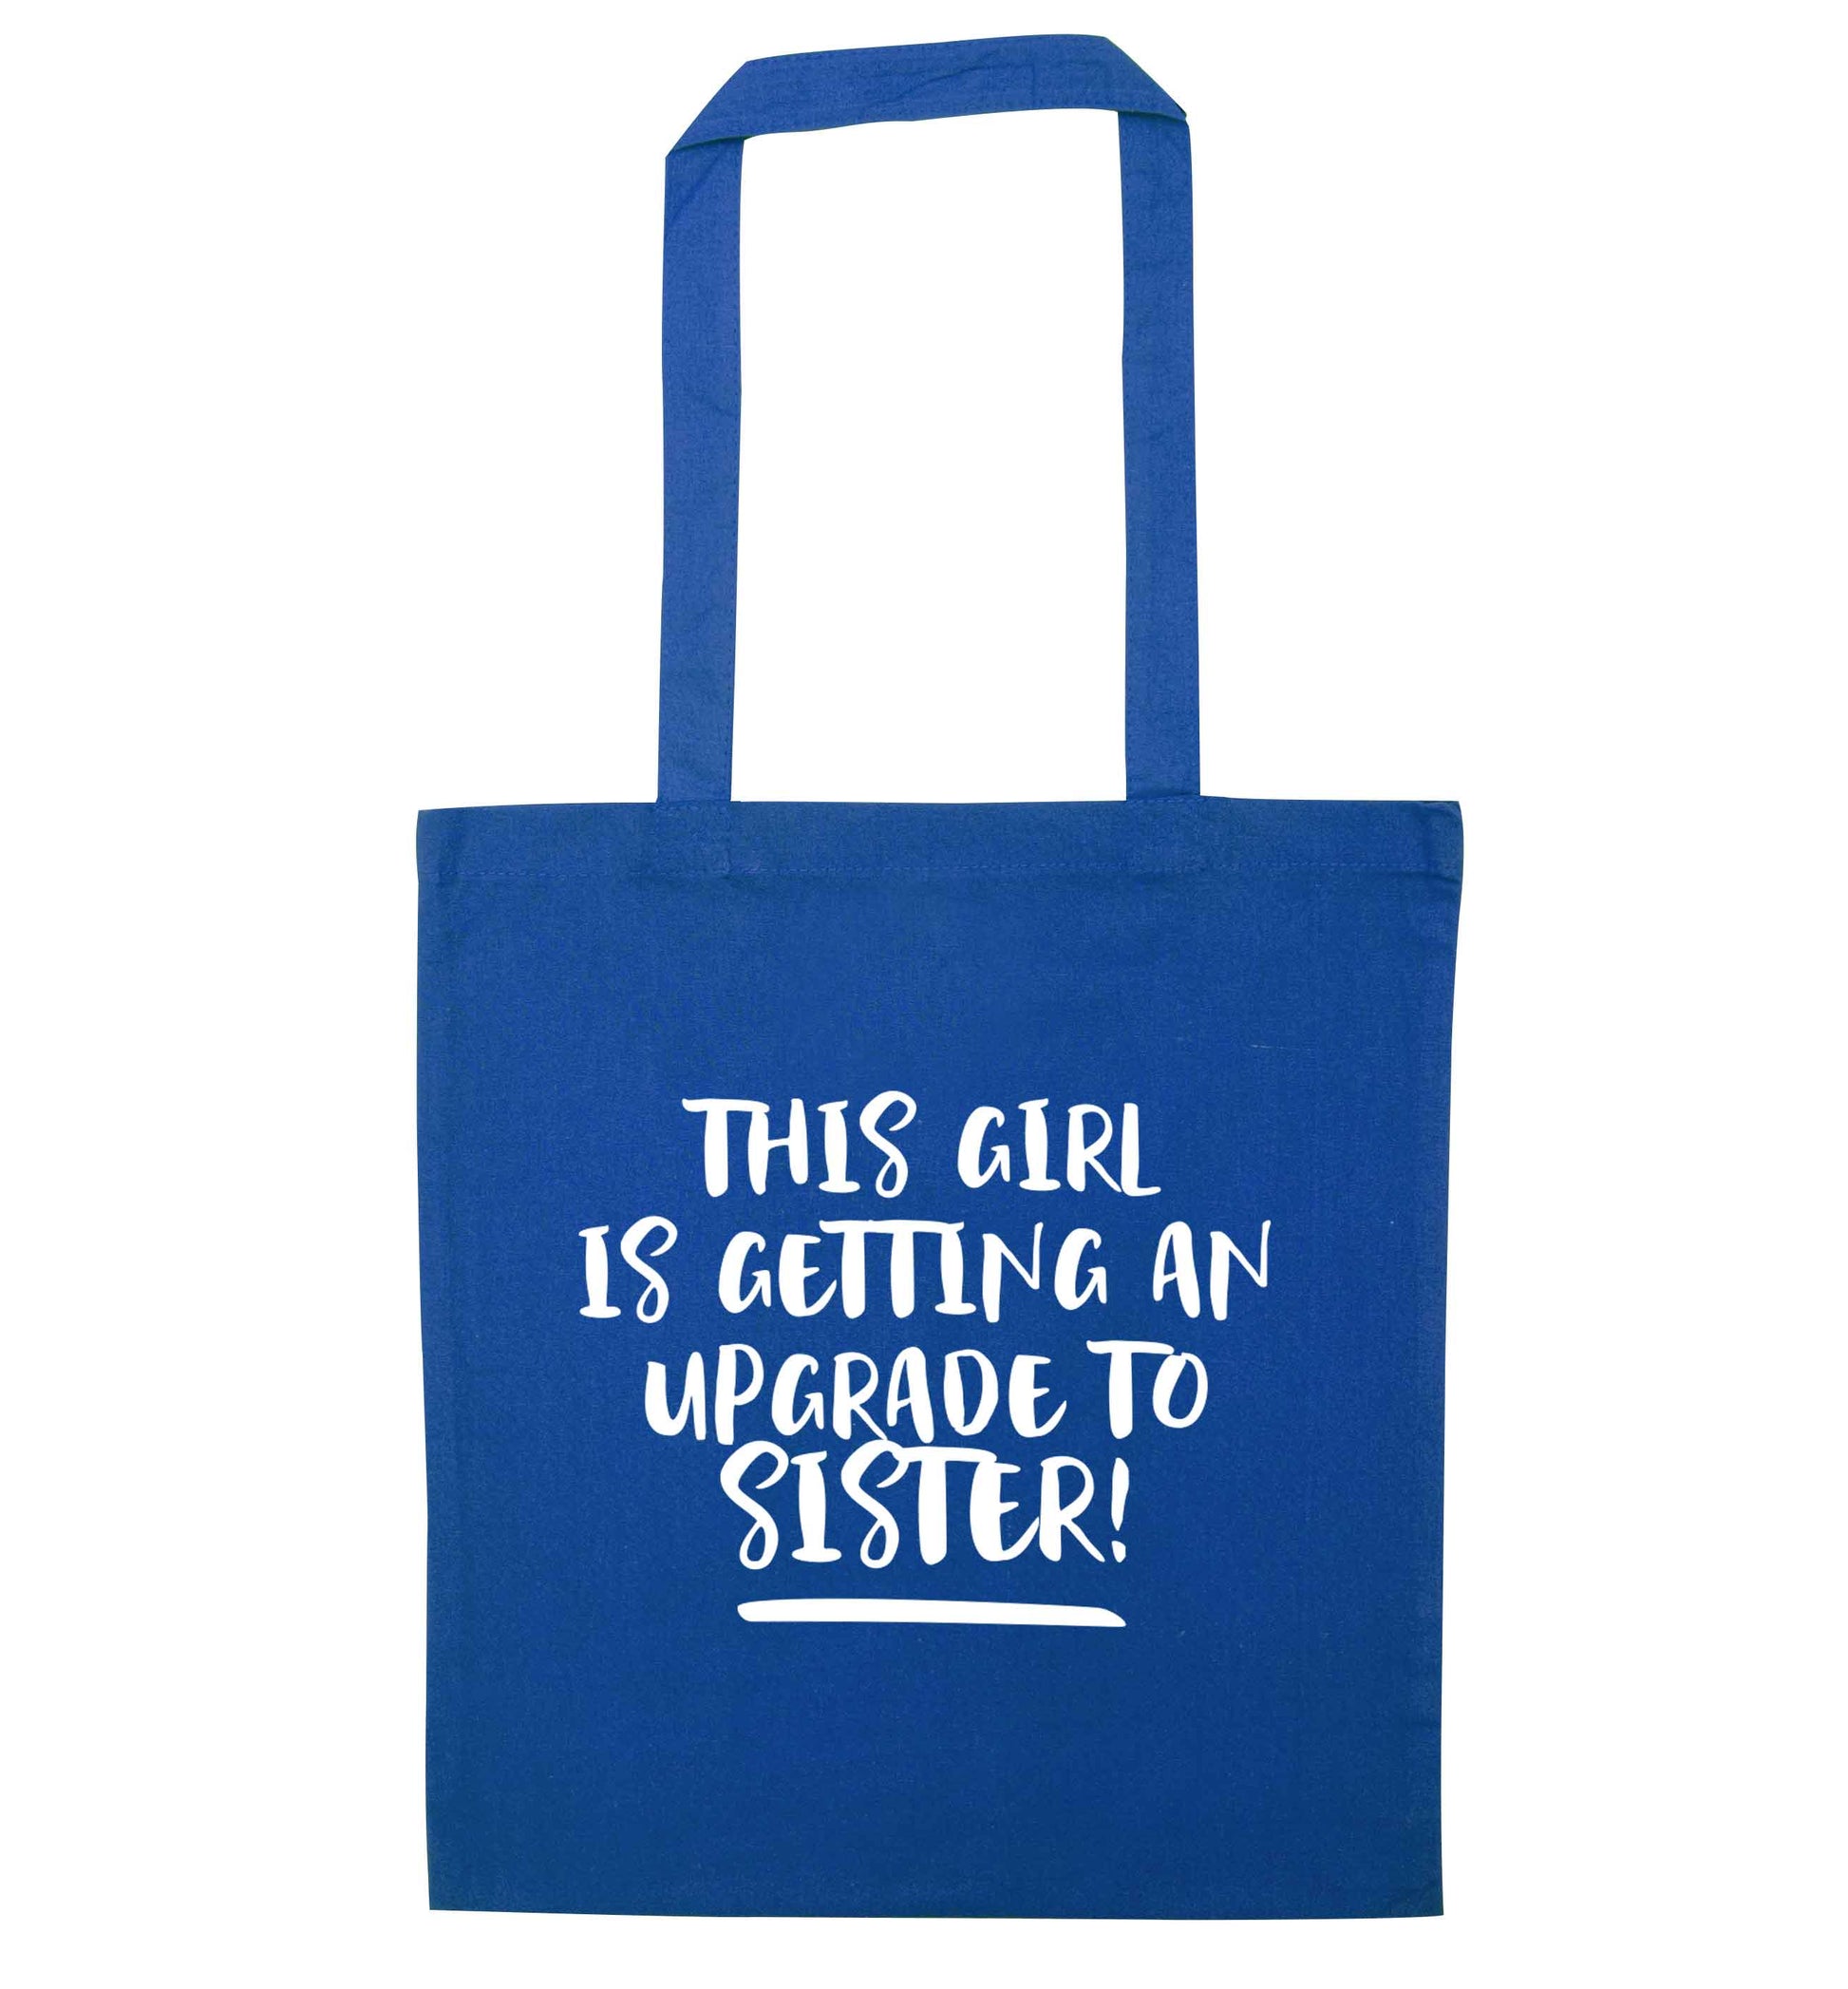 This girl is getting an upgrade to sister! blue tote bag